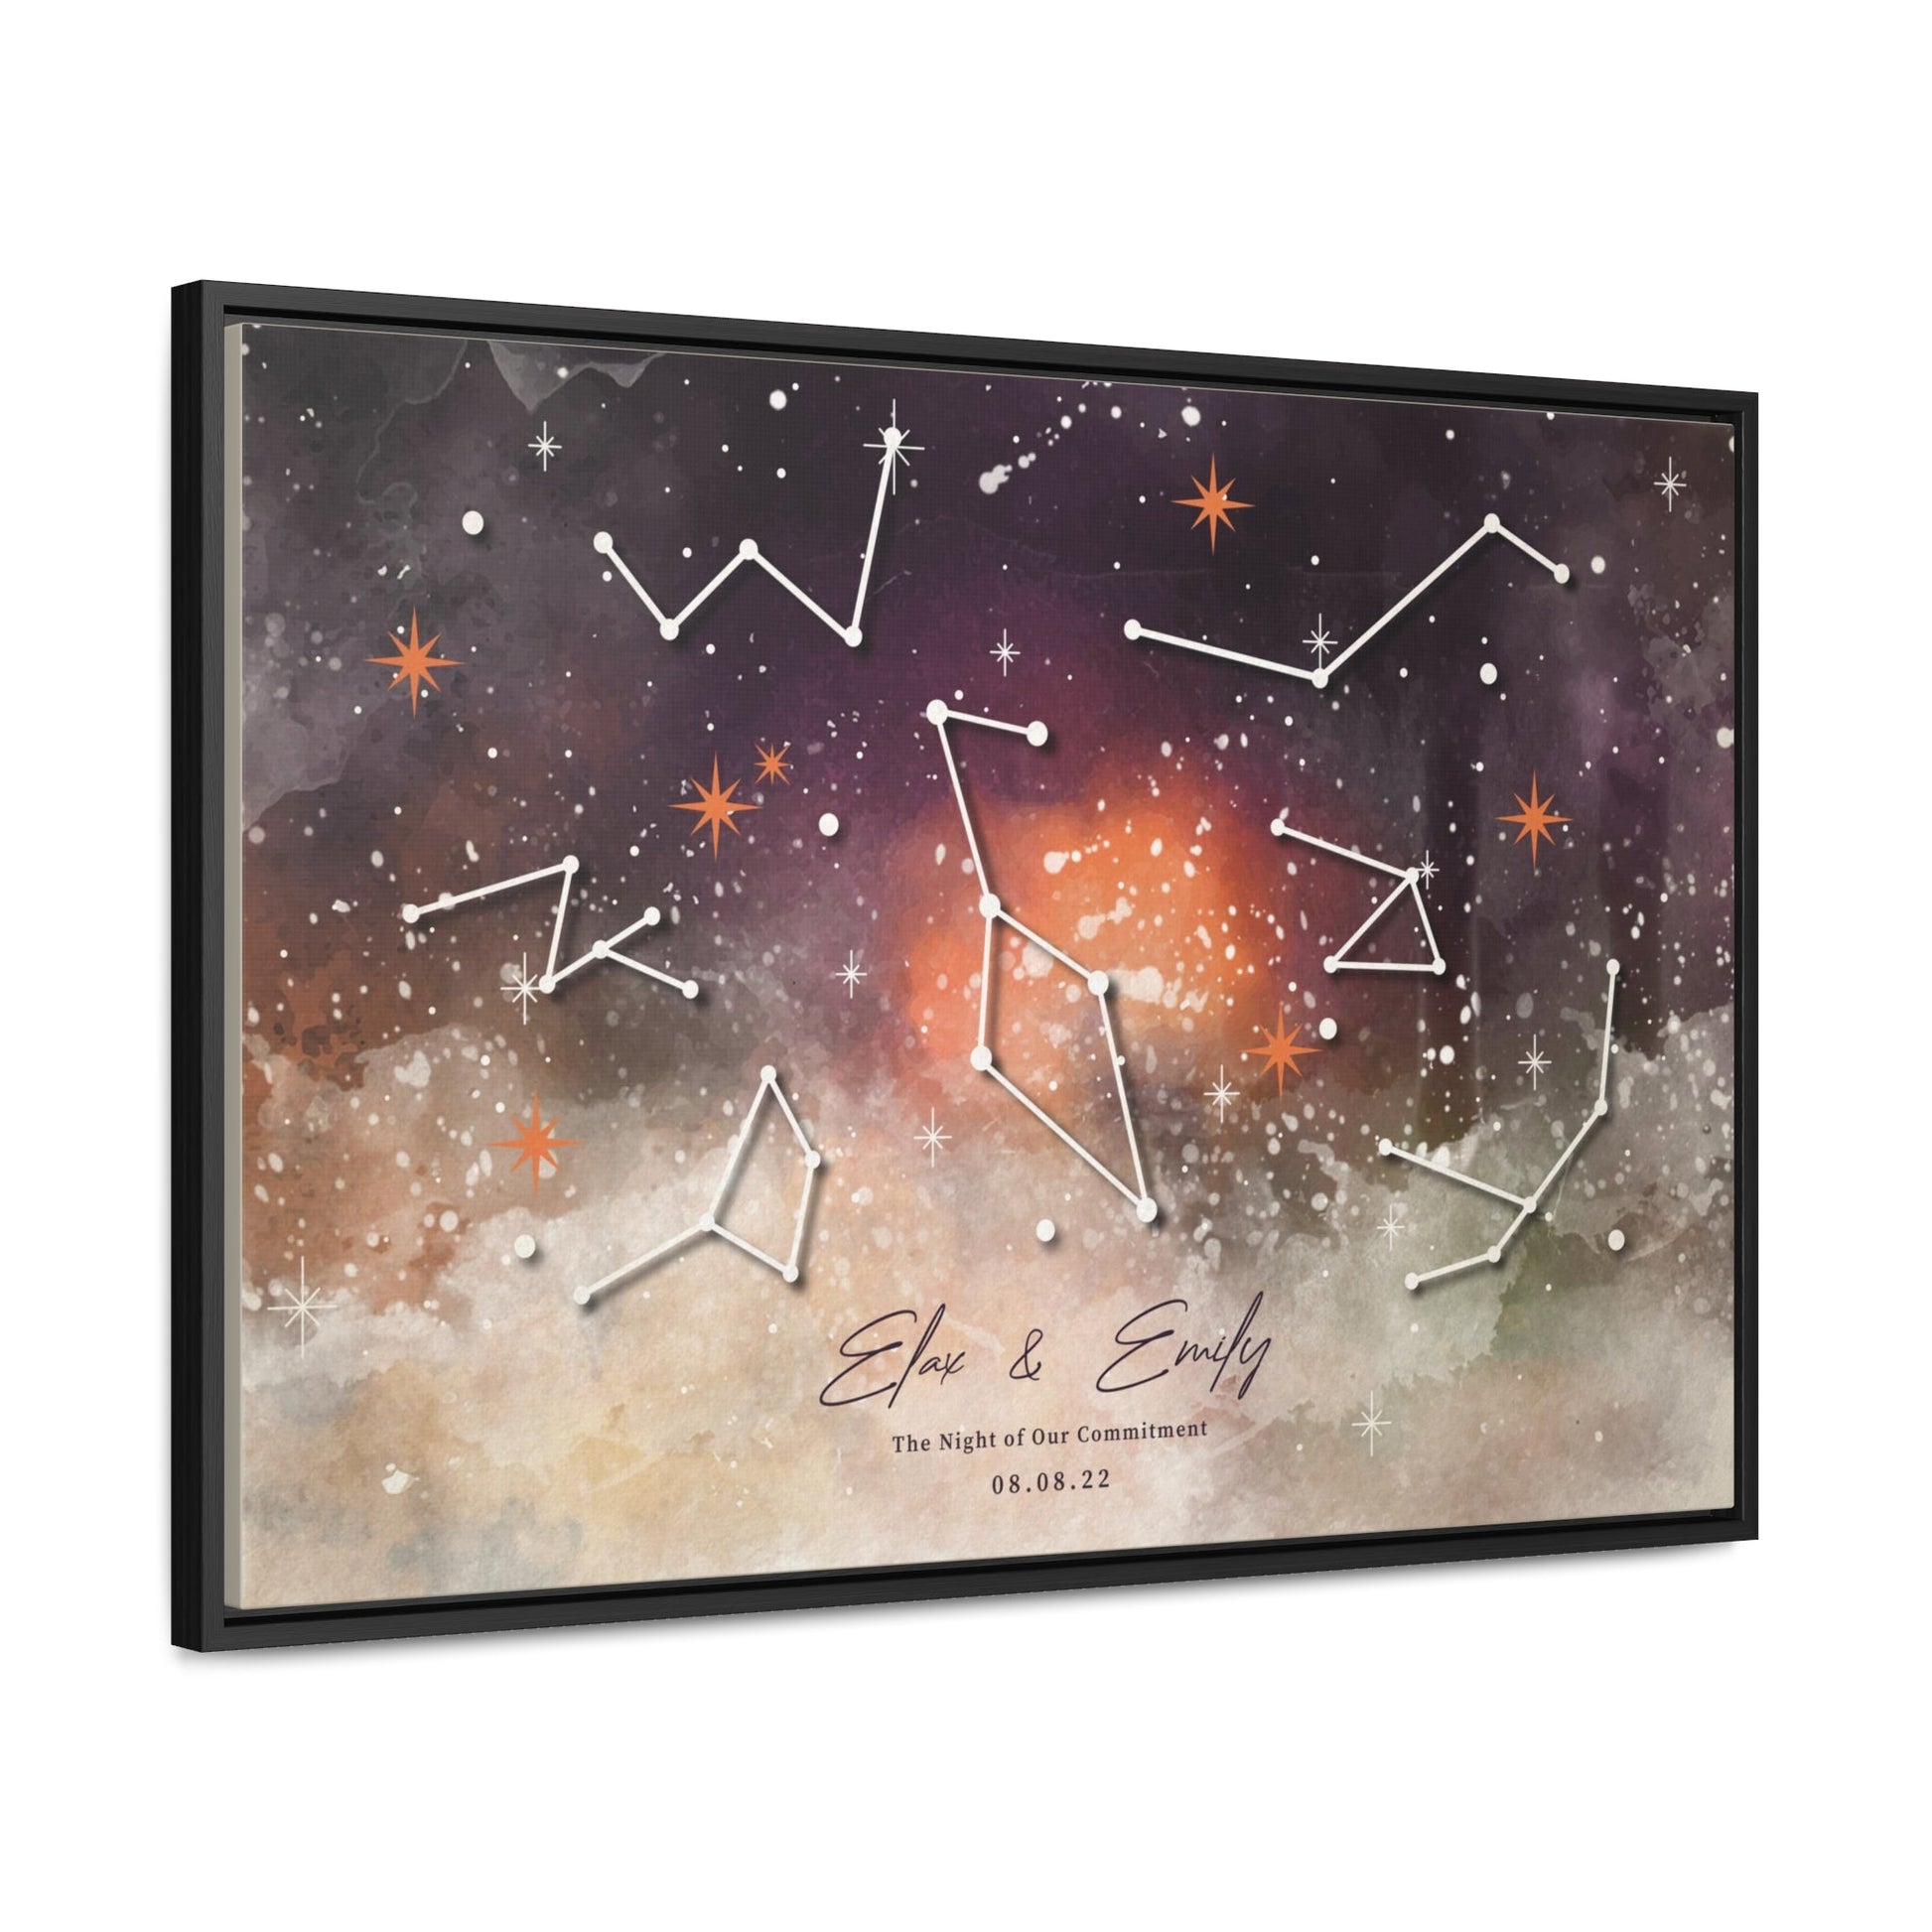 Personalized star map in frame: A timeless and heartfelt gift.